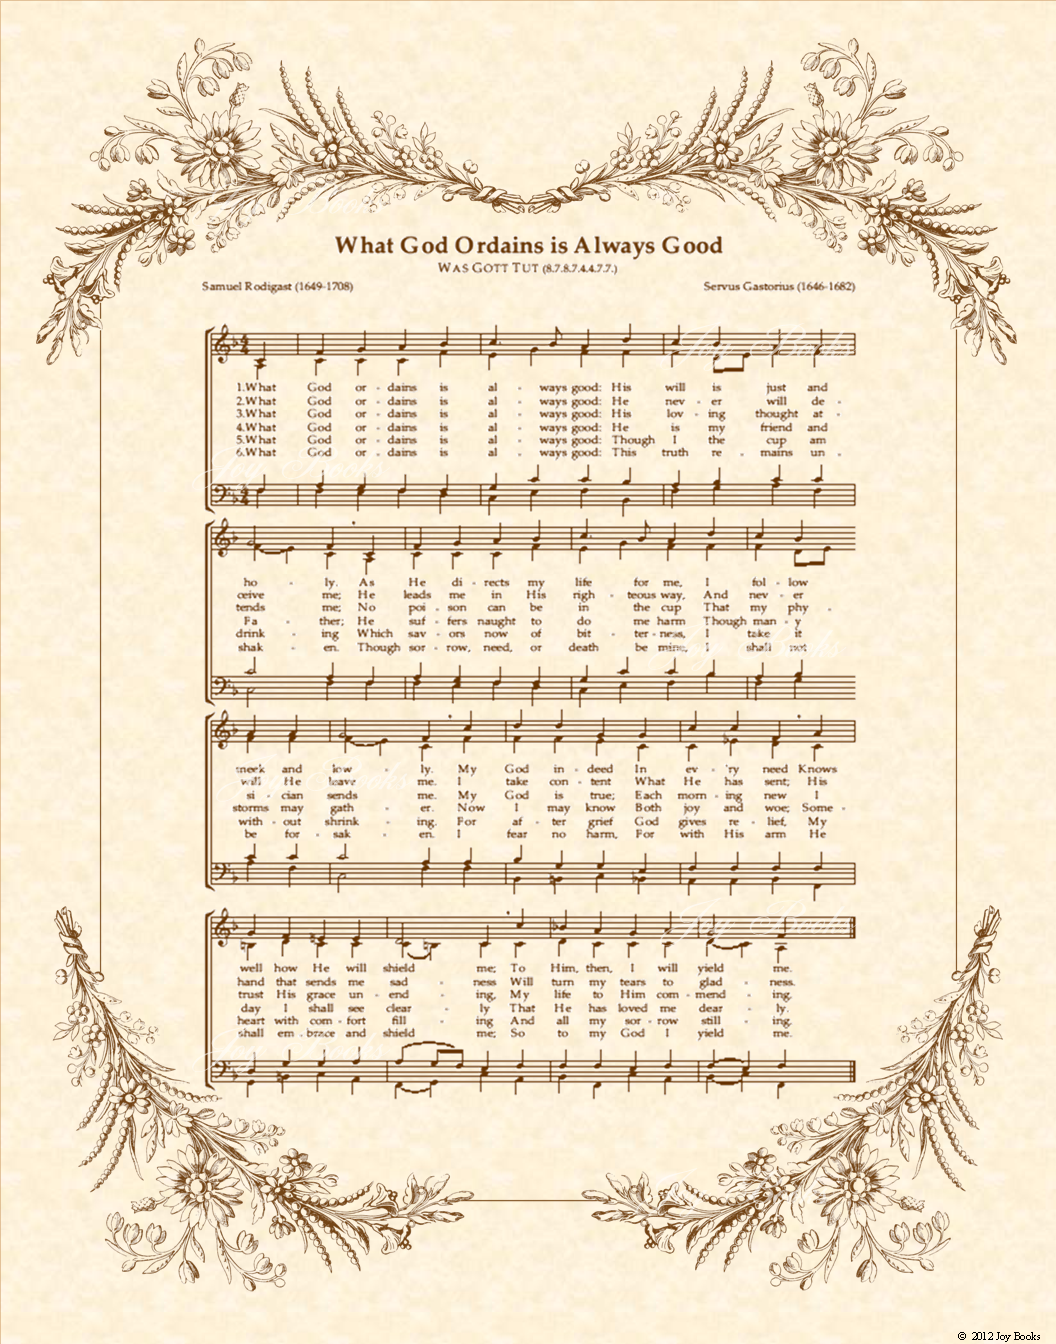 What God Ordains Is Always Good - Christian Heritage Hymn, Sheet Music, Vintage Style, Natural Parchment, Sepia Brown Ink, 8x10 art print ready to frame, Vintage Verses